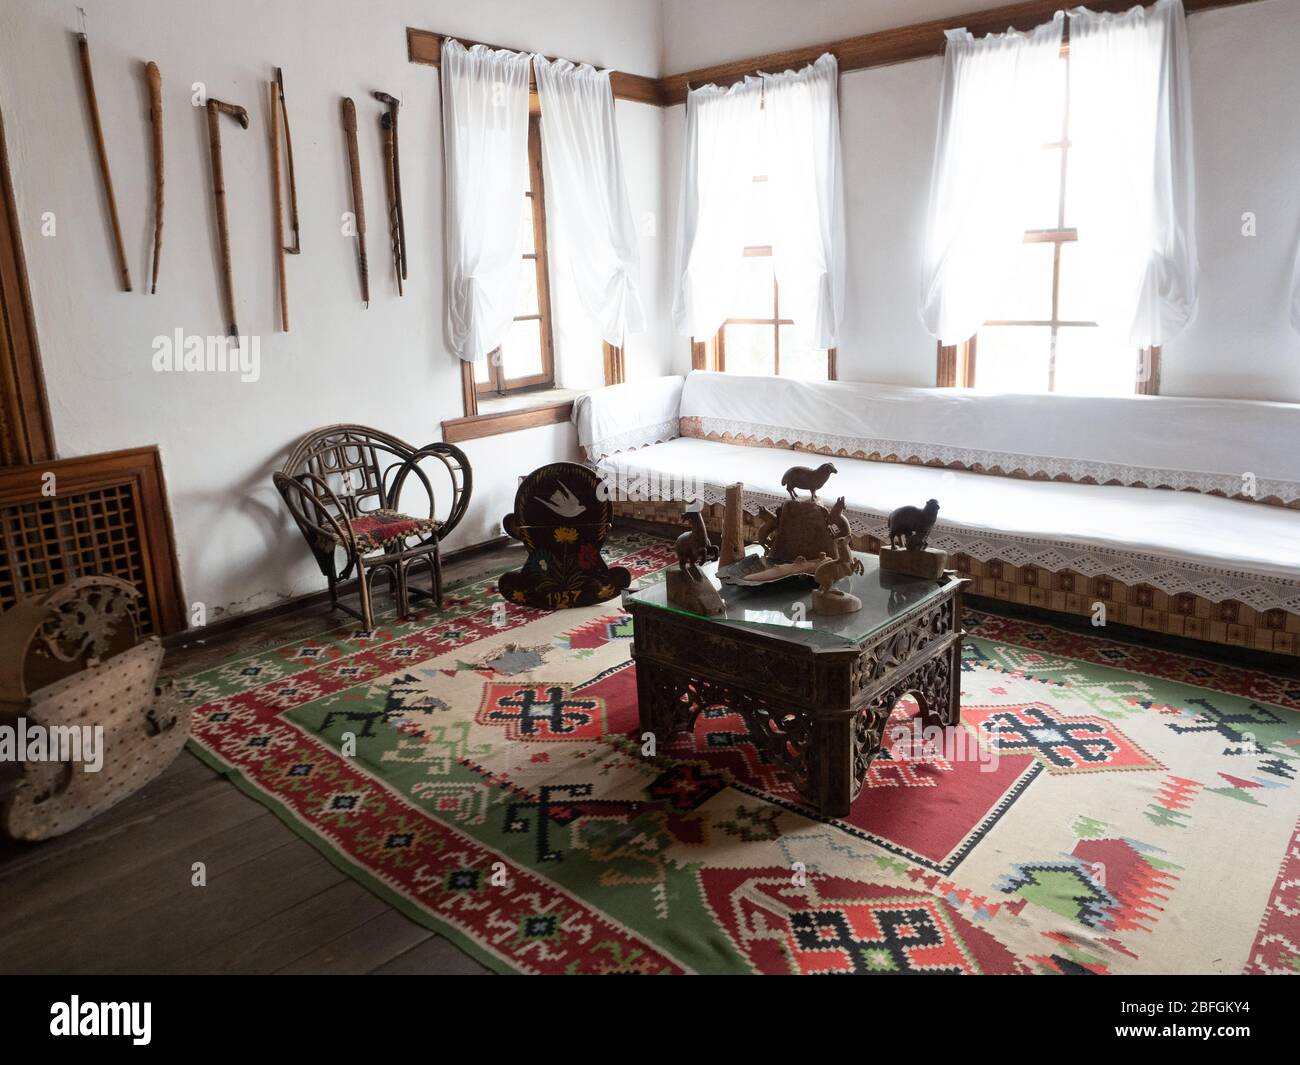 Room in the Ethnographic Museum in Gjirokaster Albania with carved wooden animal statues, cradles, and canes. Stock Photo